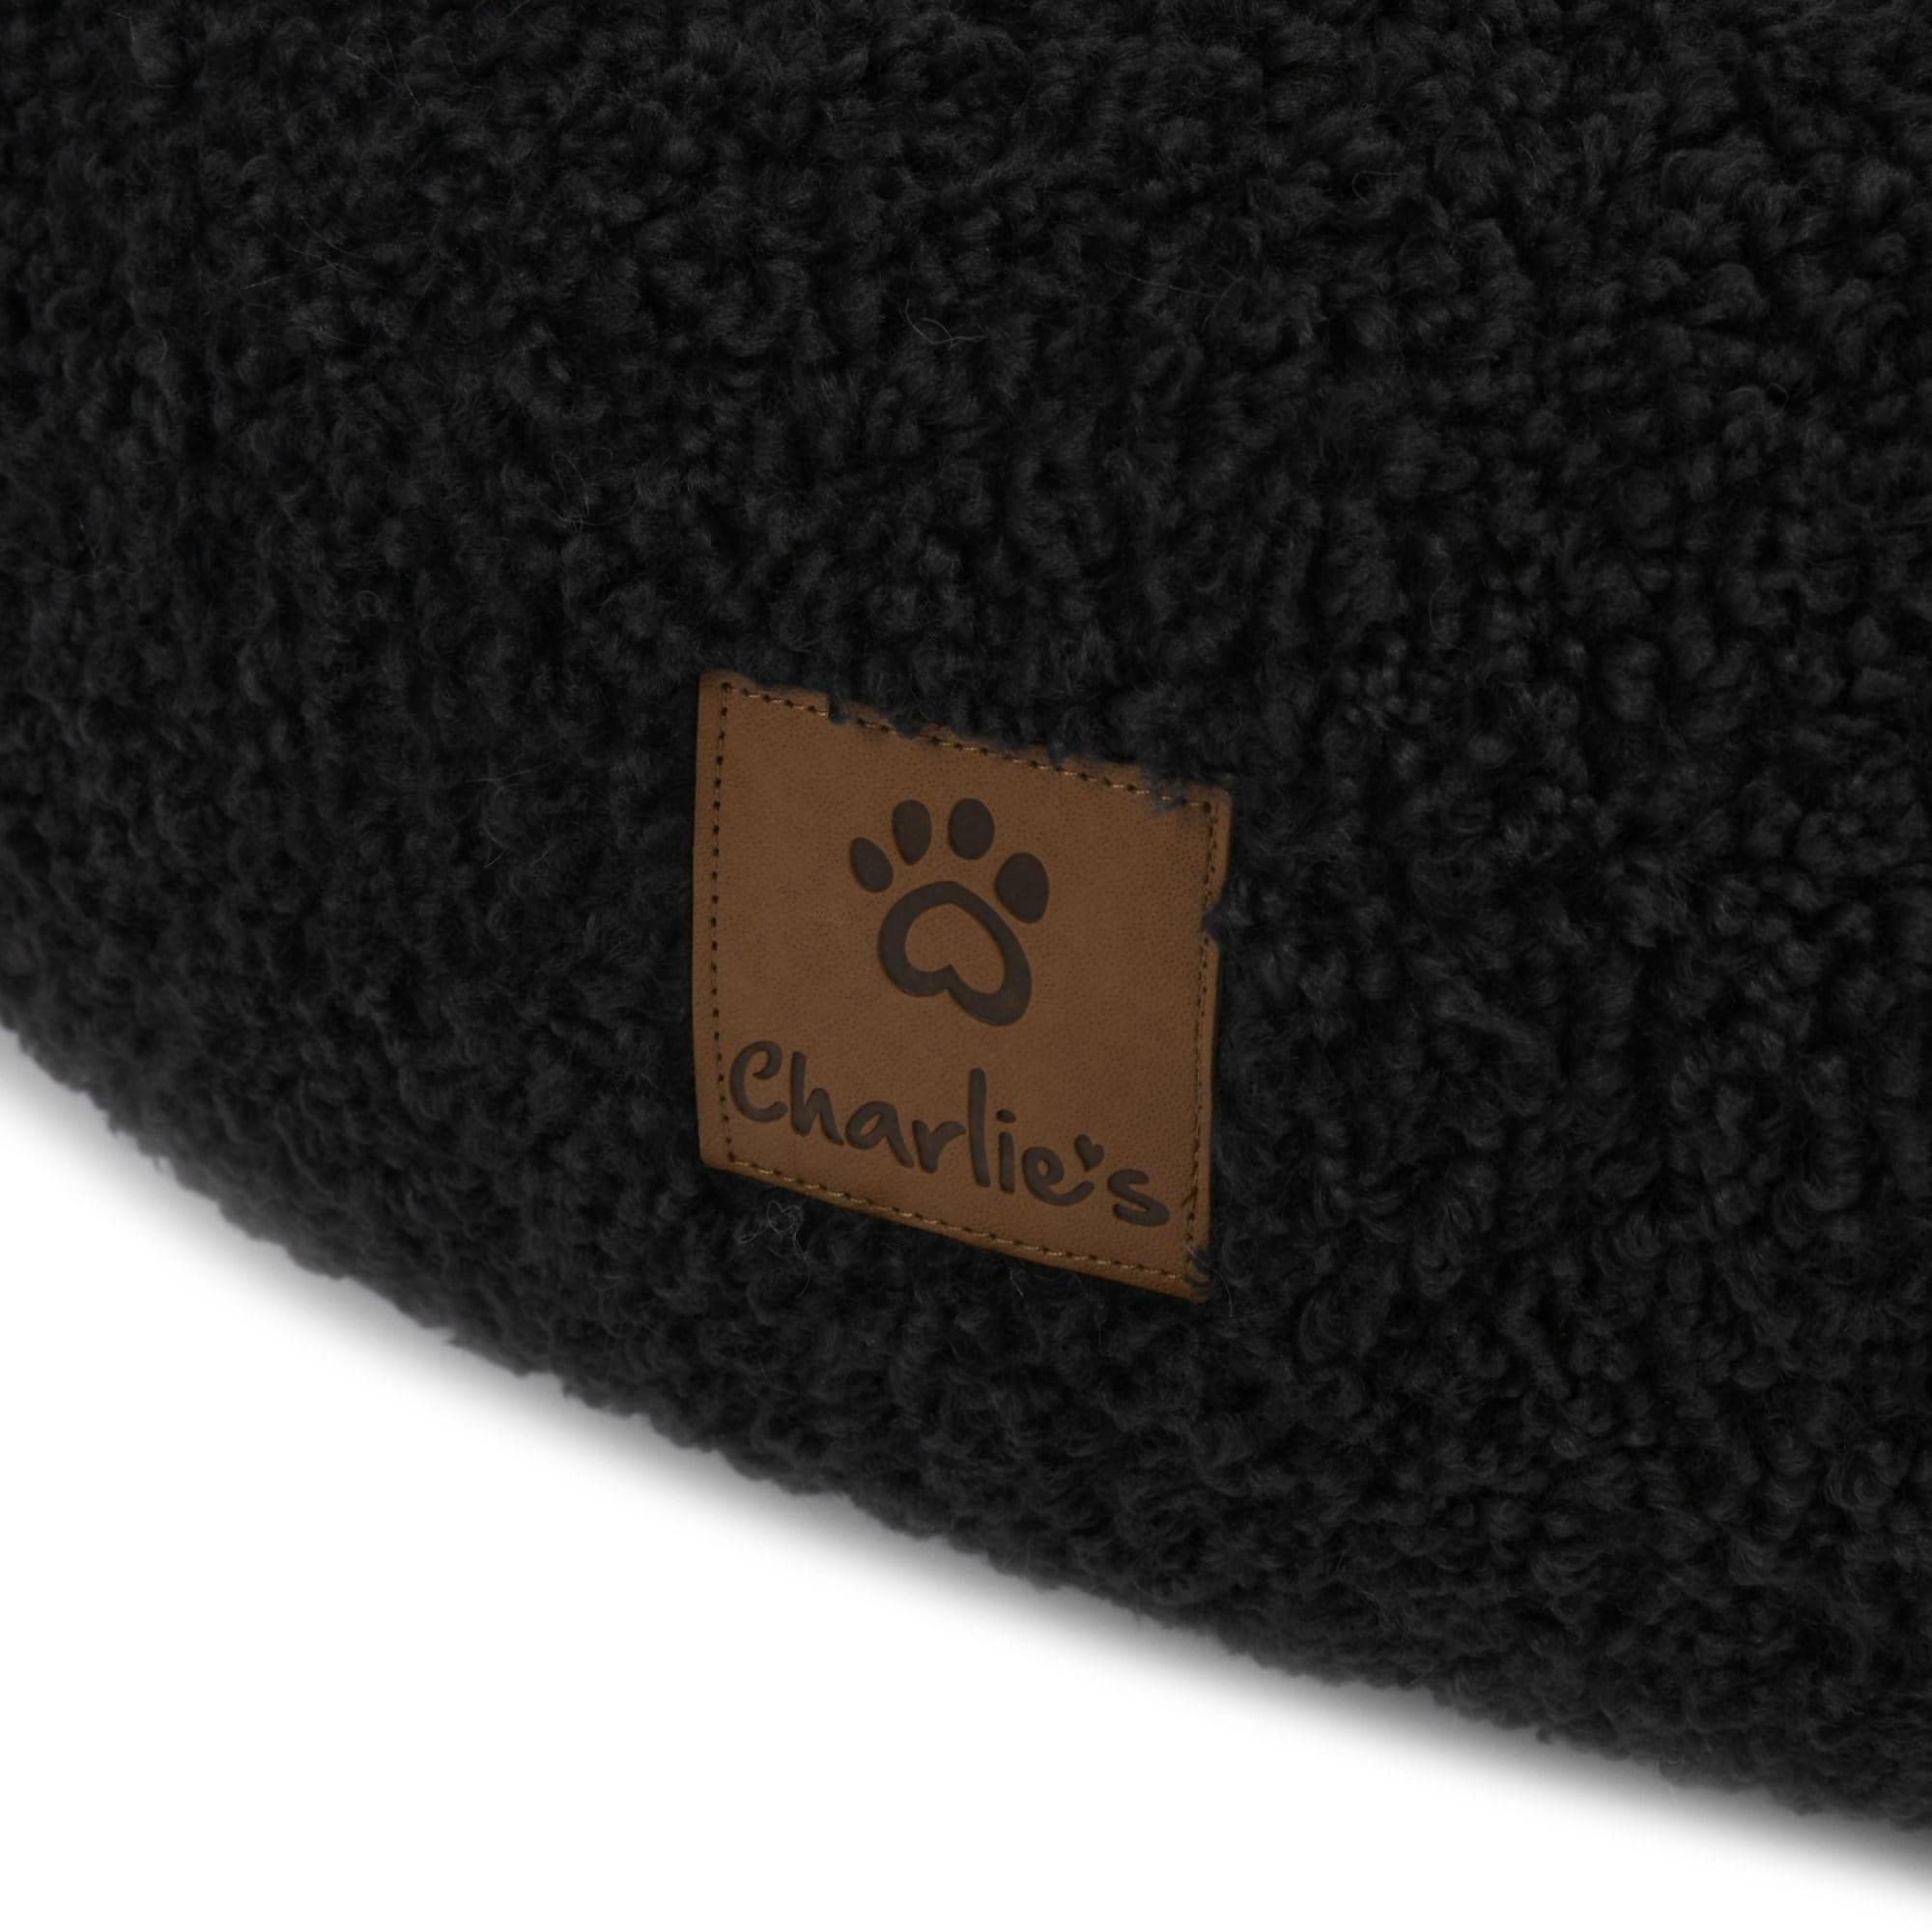 Charlie's Teddy Fleece Round Calming Dog Bed Large Charcoal Image 5